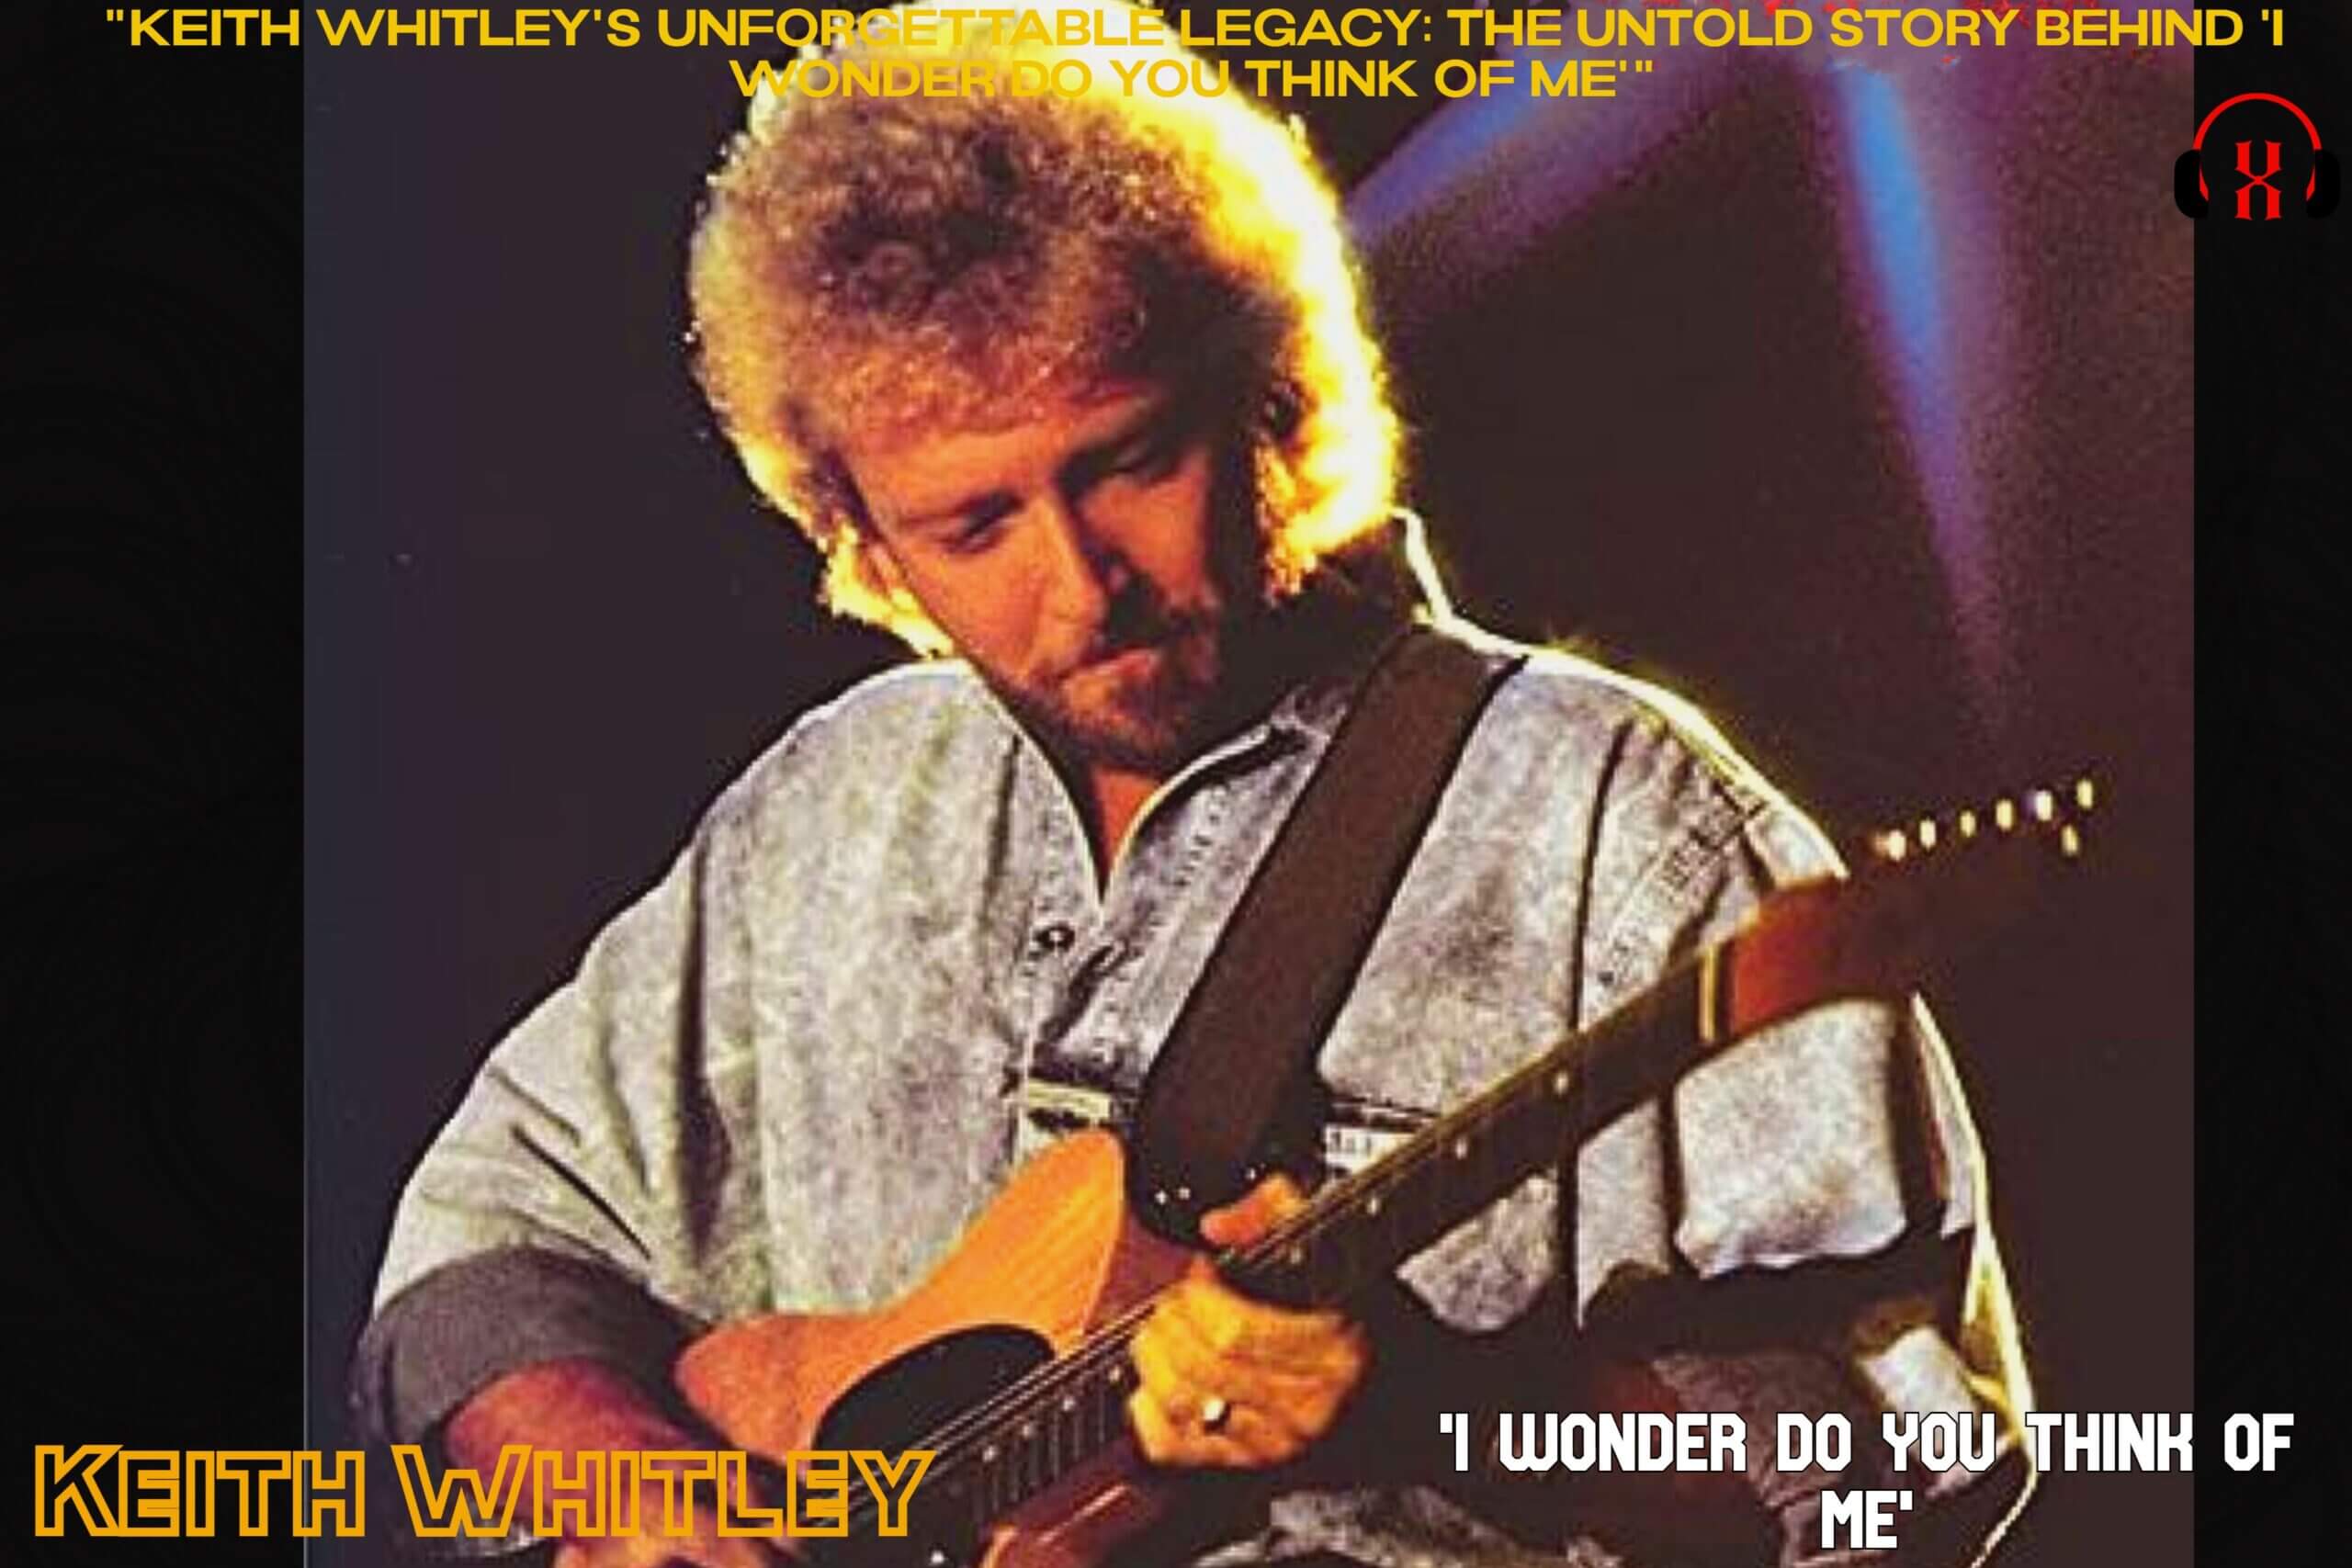 “Keith Whitley’s Unforgettable Legacy: The Untold Story Behind ‘I Wonder Do You Think Of Me'”